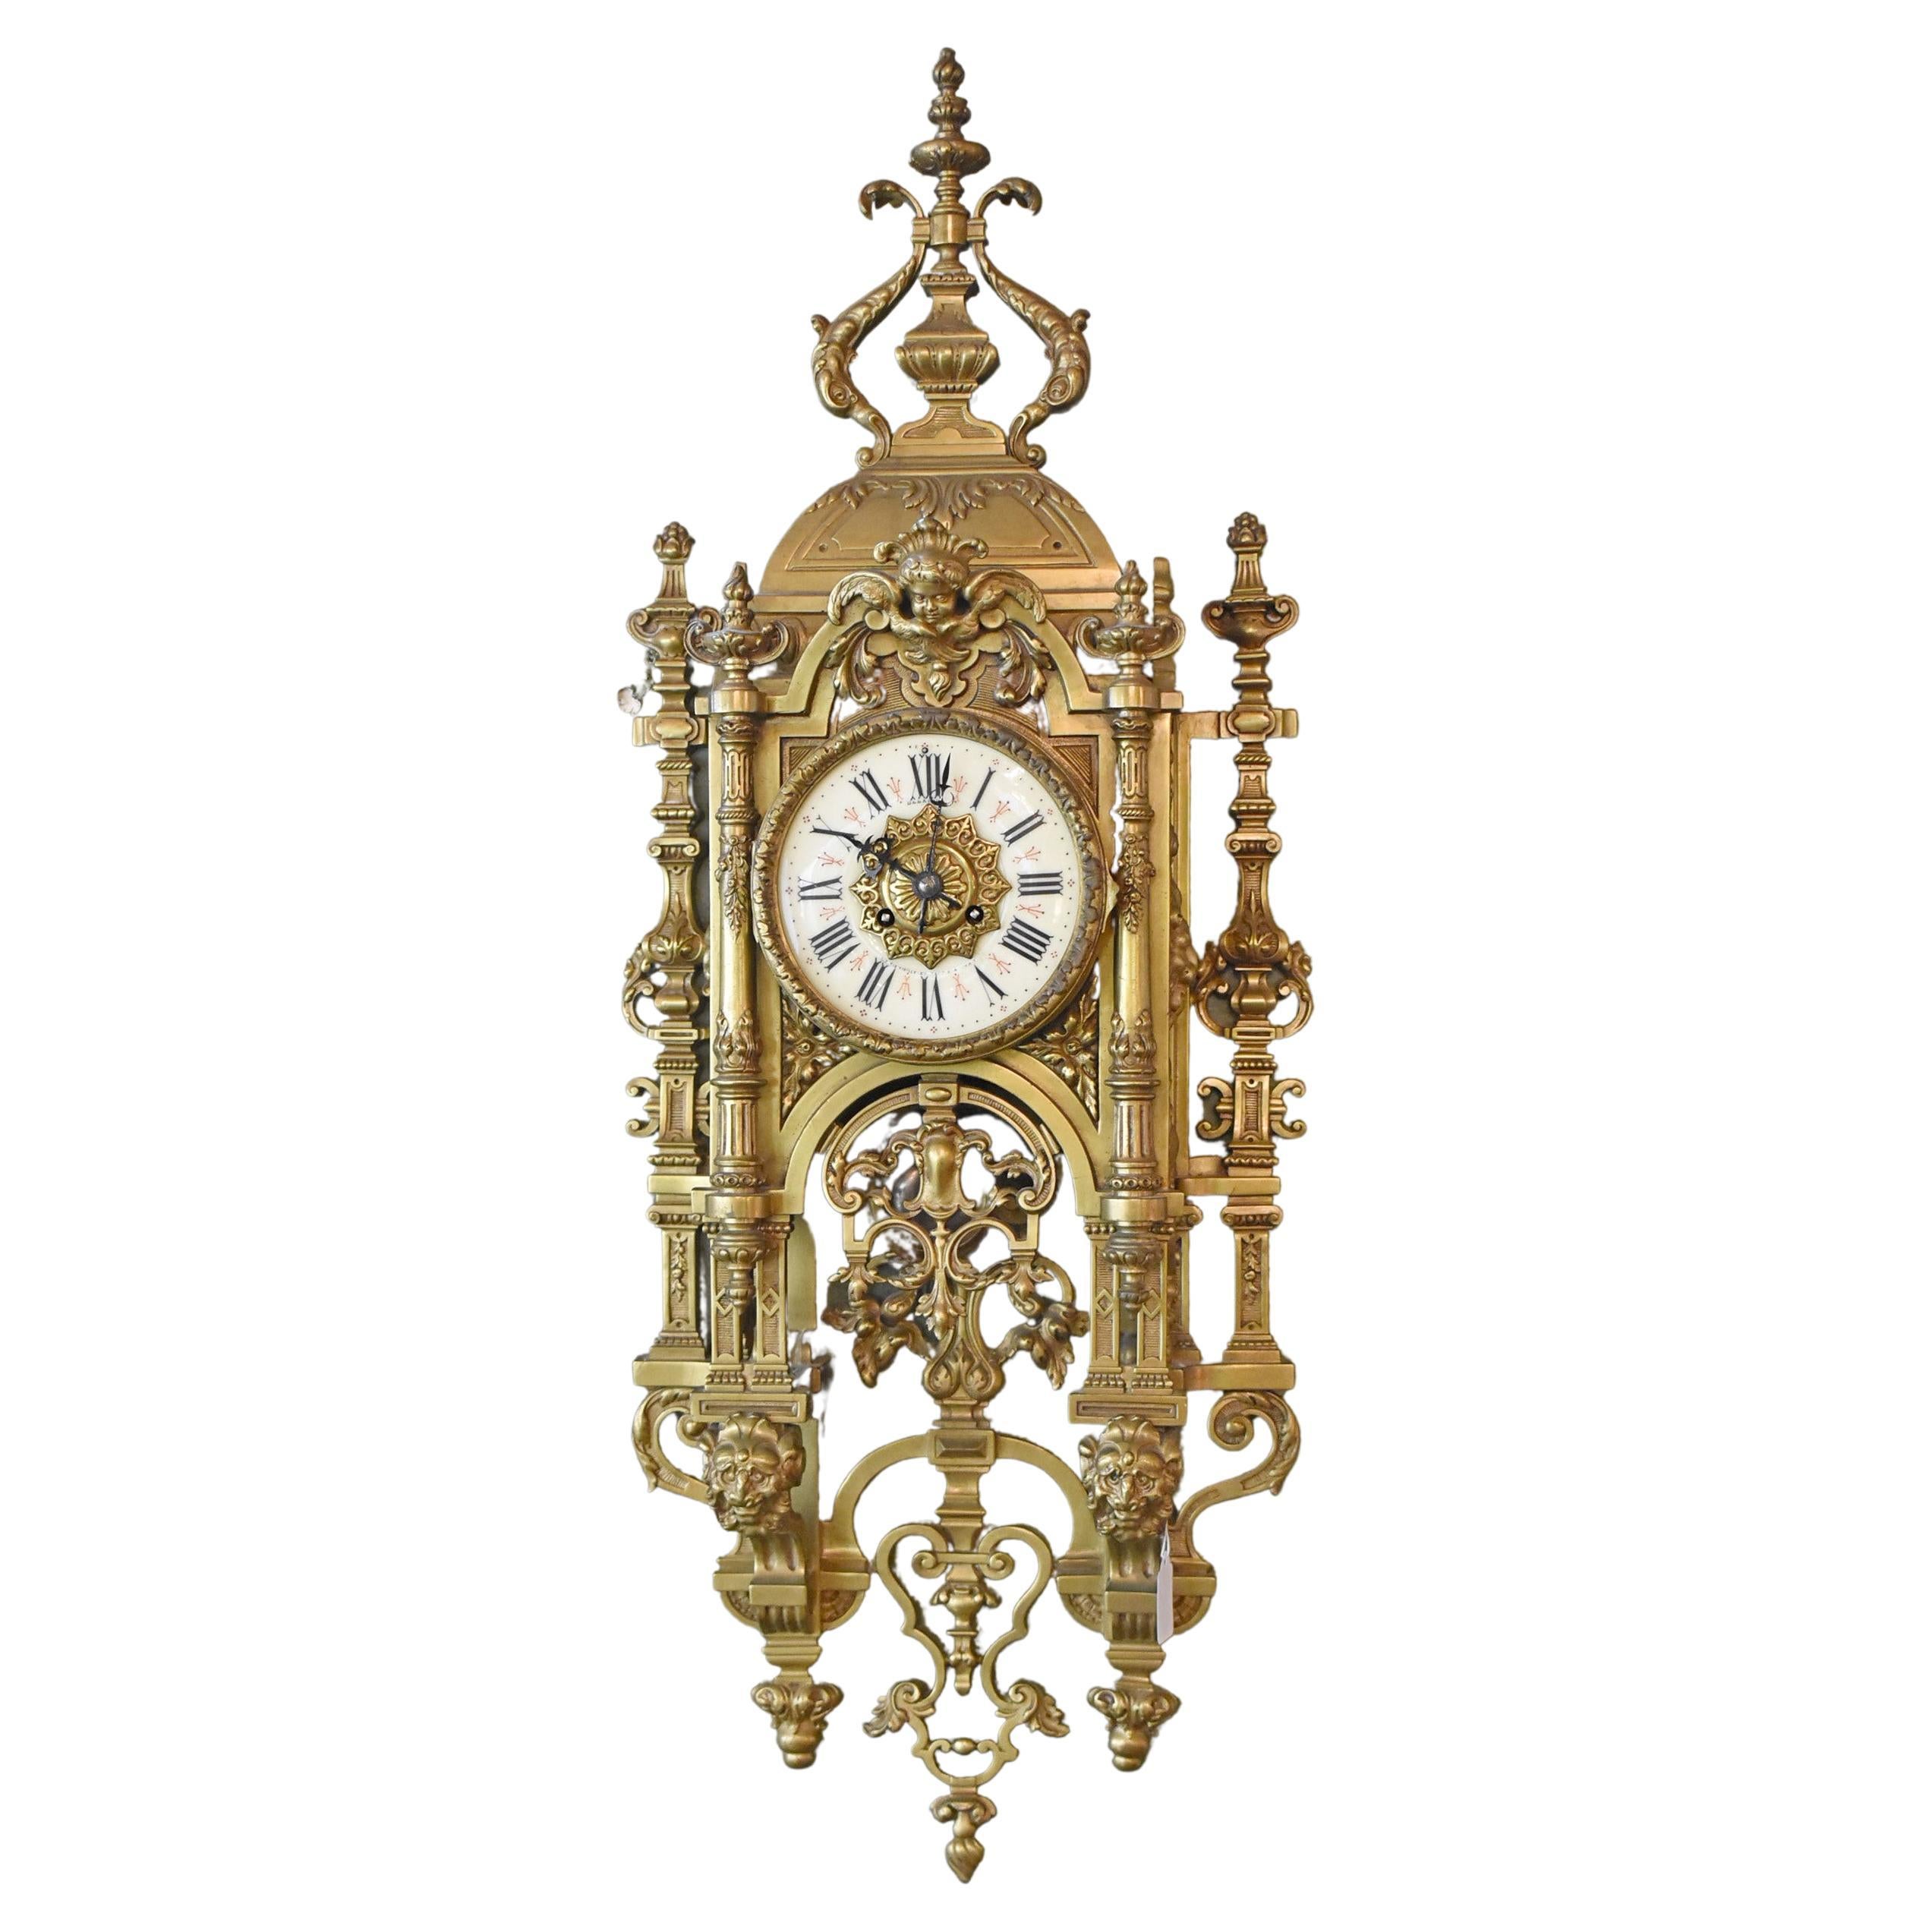 Gothic Revival French Ornate Bronze Wall Clock